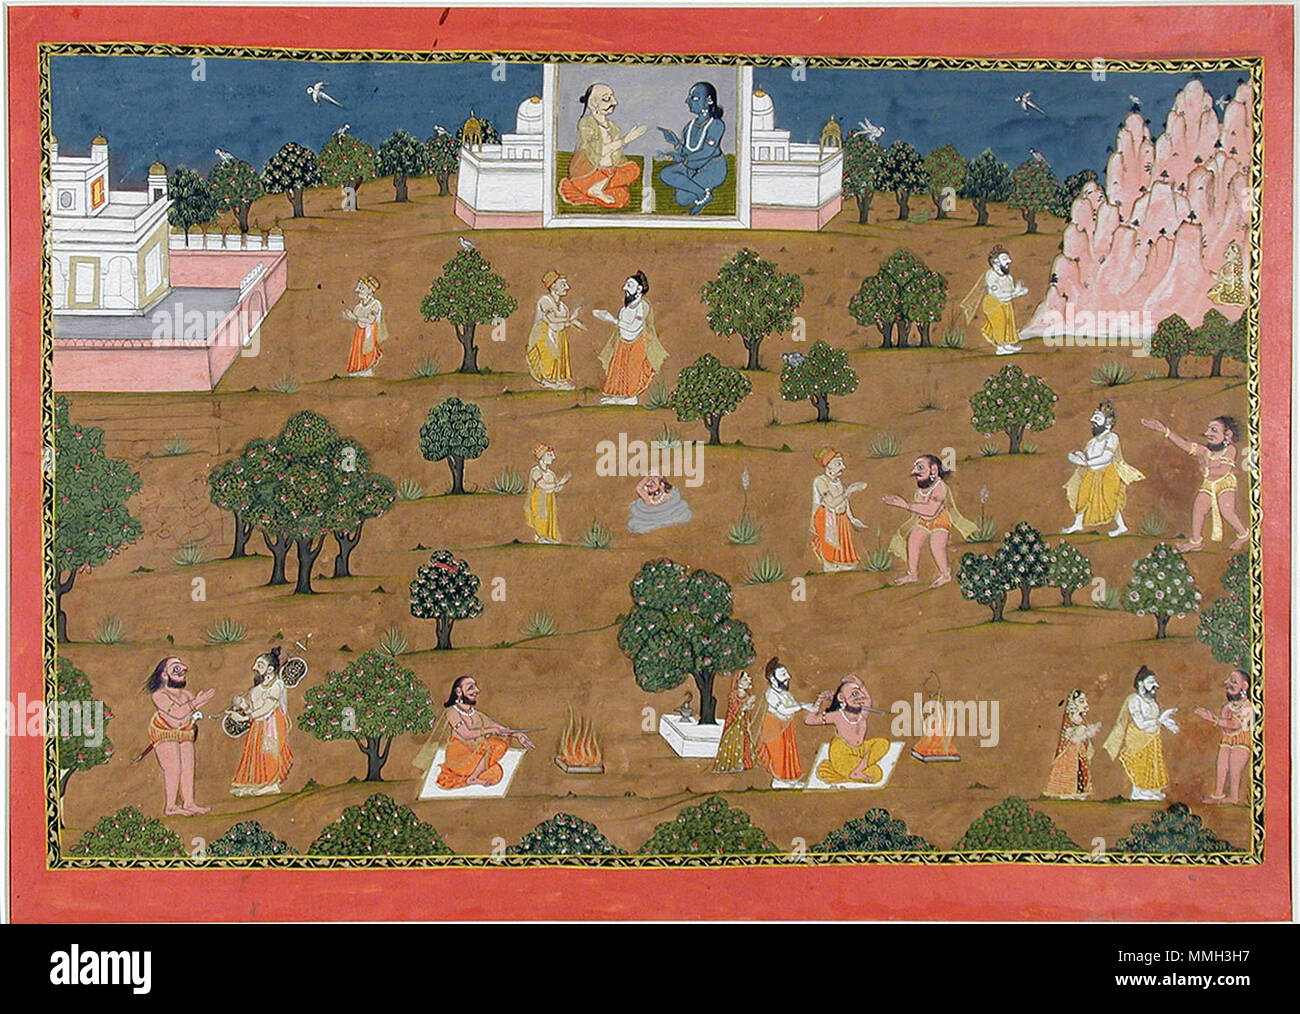 . English: Series Title: The Ancient Text of the Lord Suite Name: Bhagavata Purana Creation Date: ca. 1750 Display Dimensions: 12 11/16 in. x 17 5/16 in. (32.2 cm x 44 cm) Credit Line: Edwin Binney 3rd Collection Accession Number: 1990.985 Collection: The San Diego Museum of Art  . 15 October 2001, 10:12:09. English: thesandiegomuseumofartcollection Adventures in the jungle (6125118372) Stock Photo